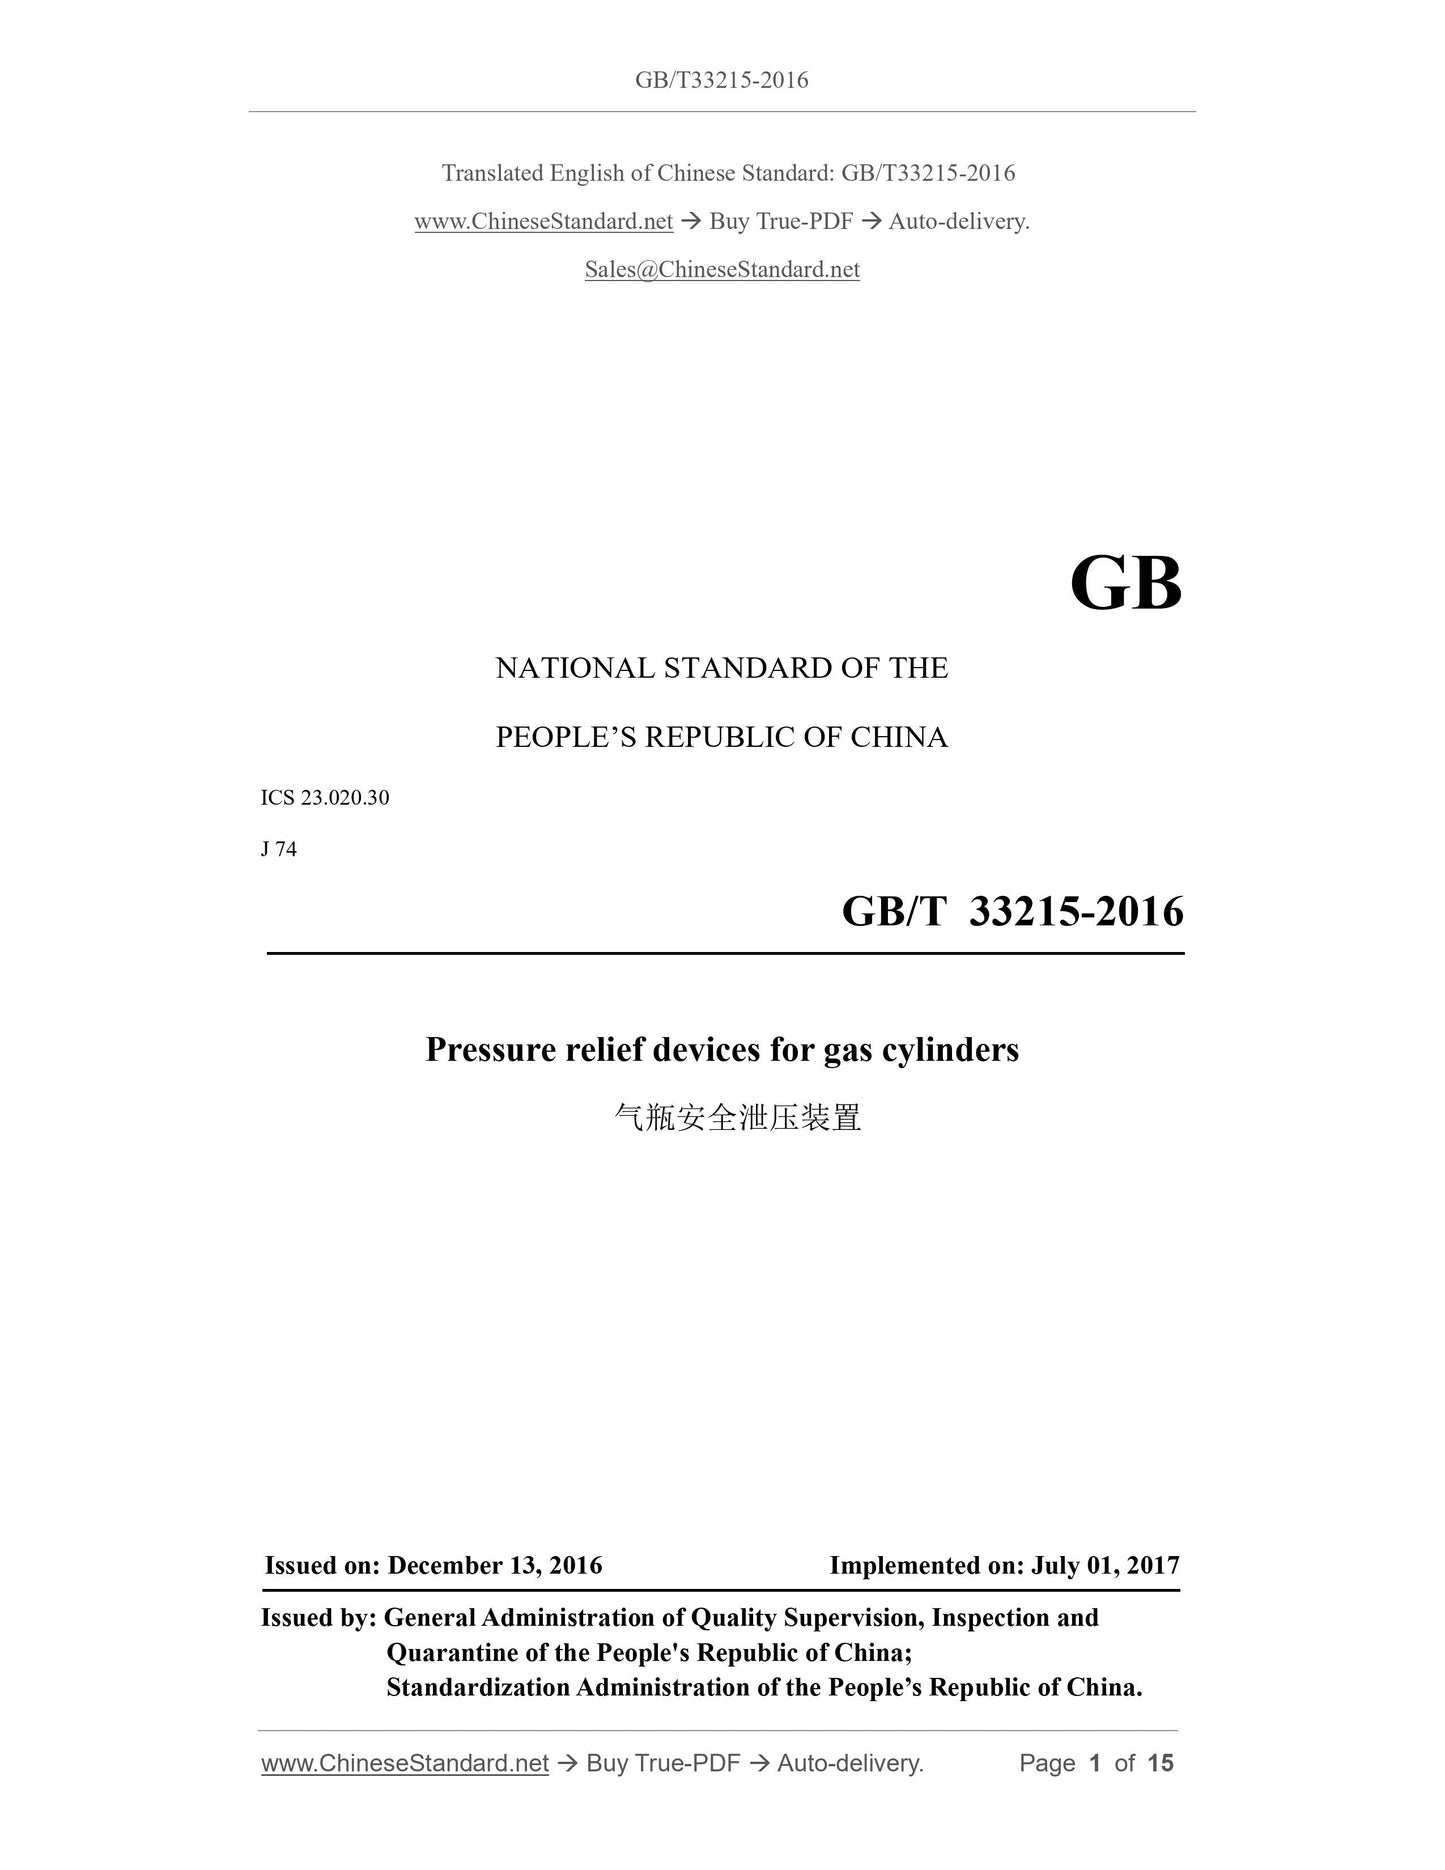 GB/T 33215-2016 Page 1